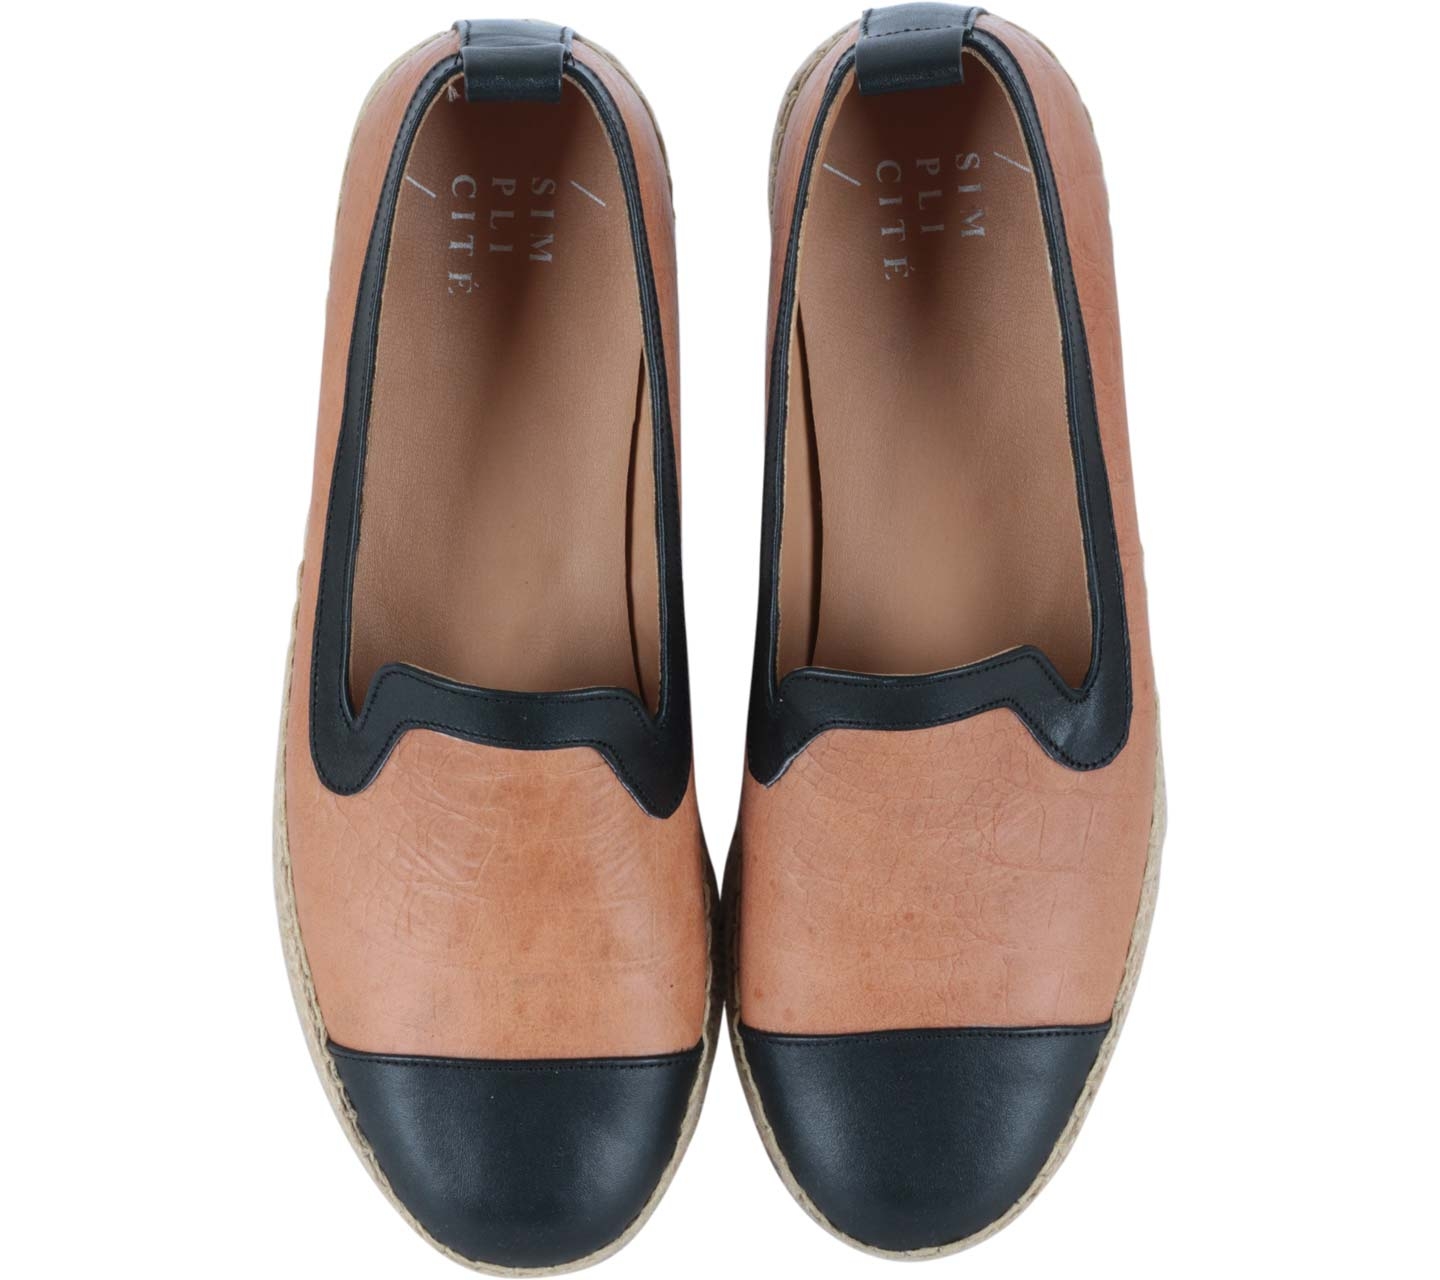 We Are Simplicite Brown And Black Leather Espadrilles Flats